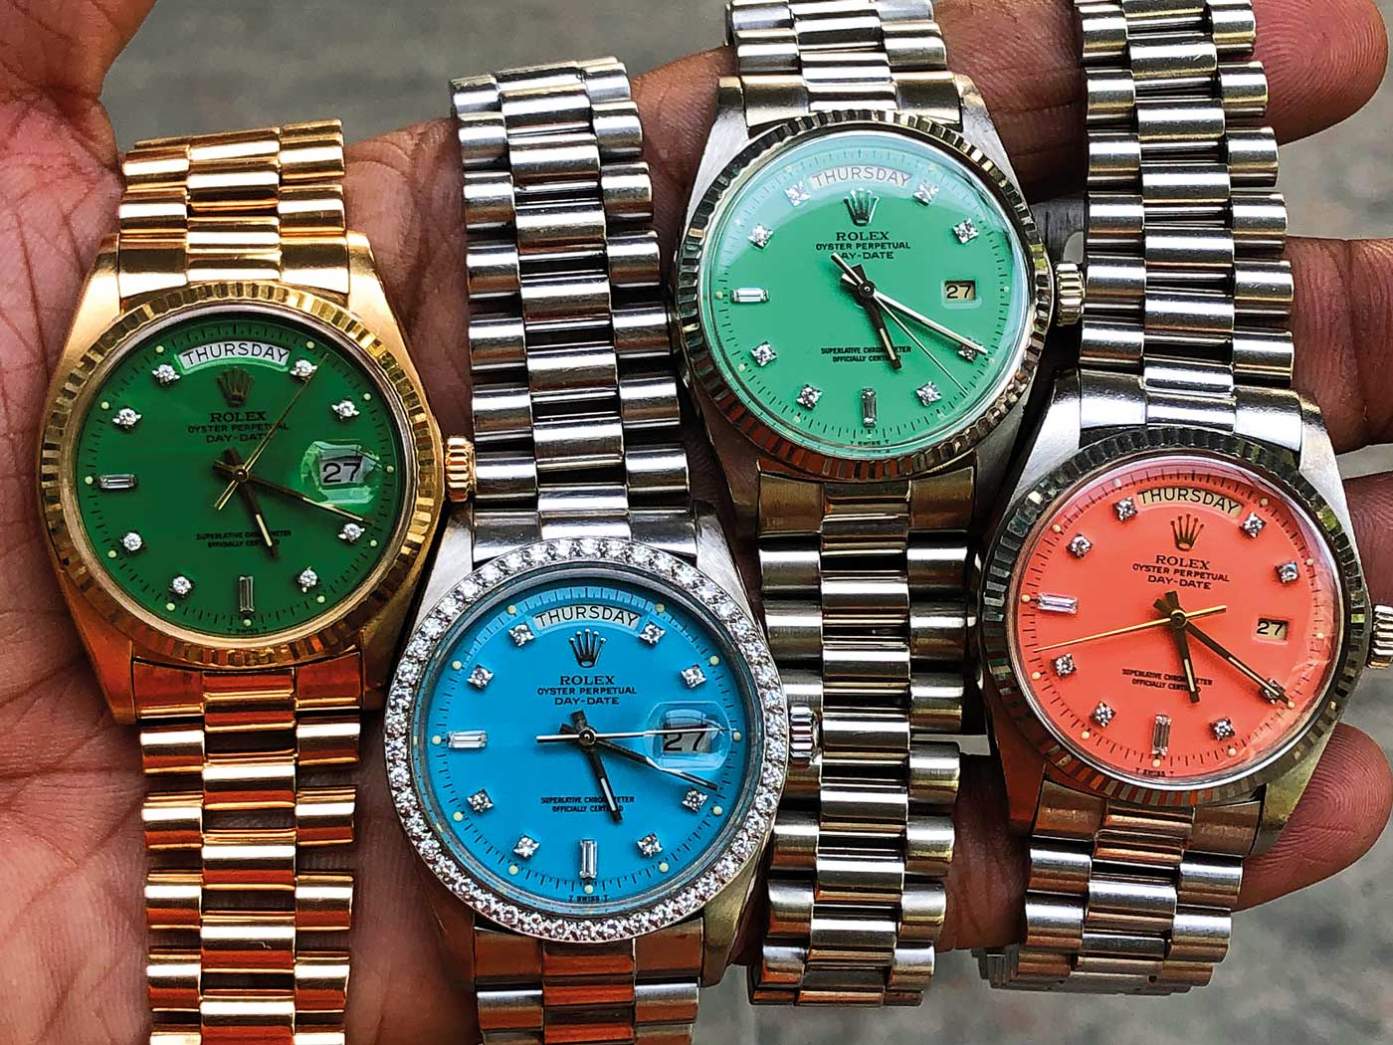 RECOMMENDED WATCHING: 3 reasons why watches are so horribly expensive